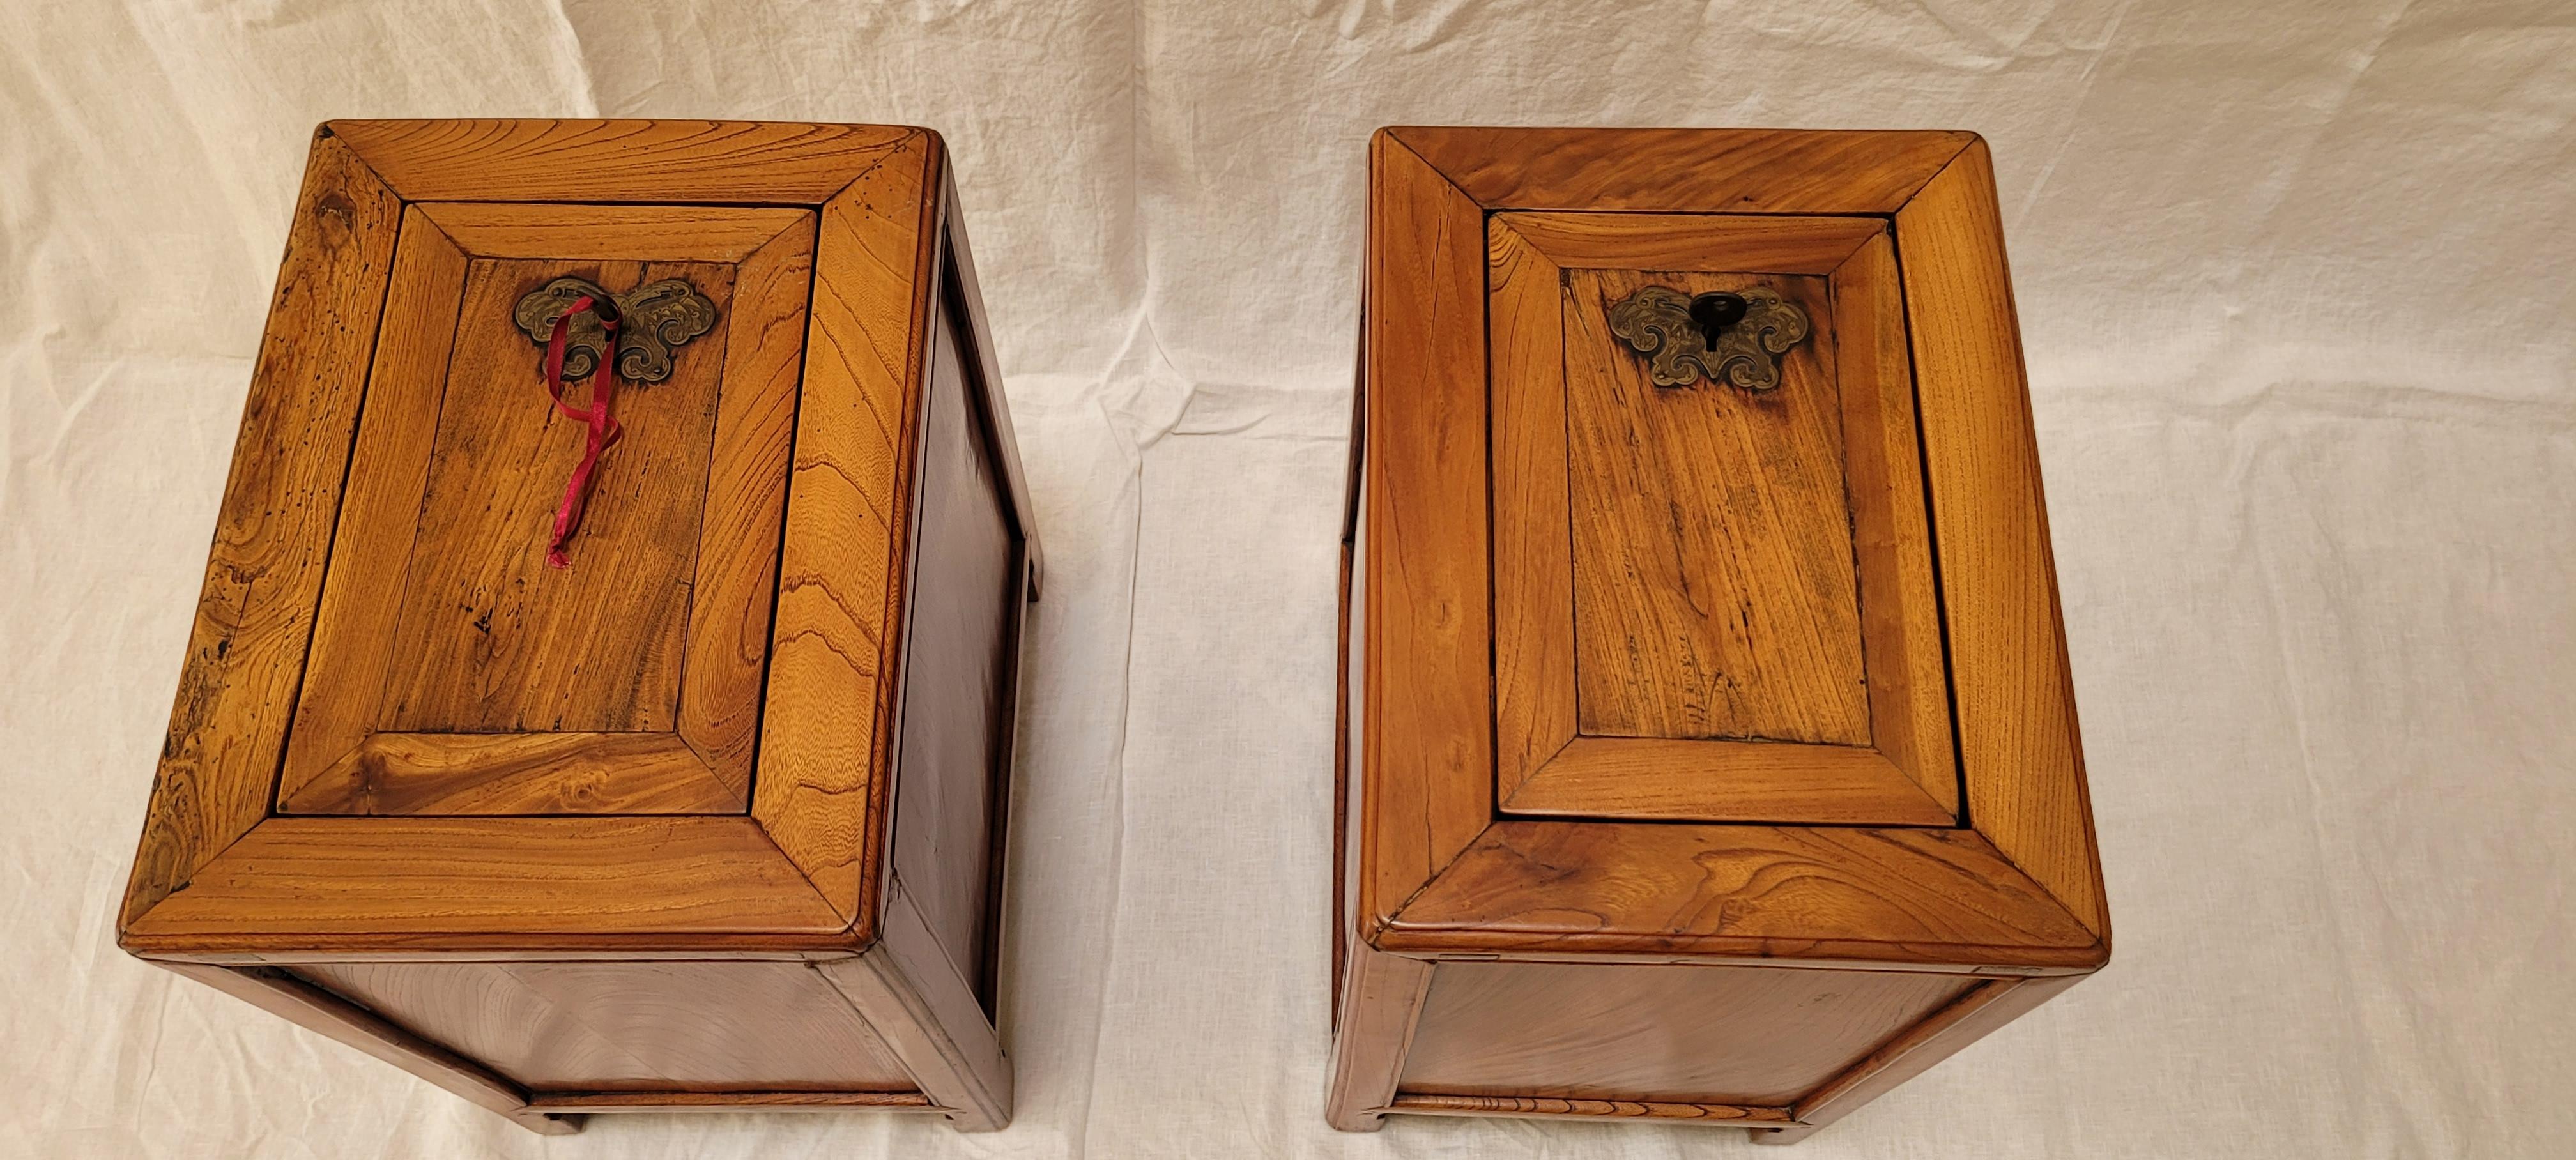 Hardwood 19th Century Pair of Money Chests For Sale